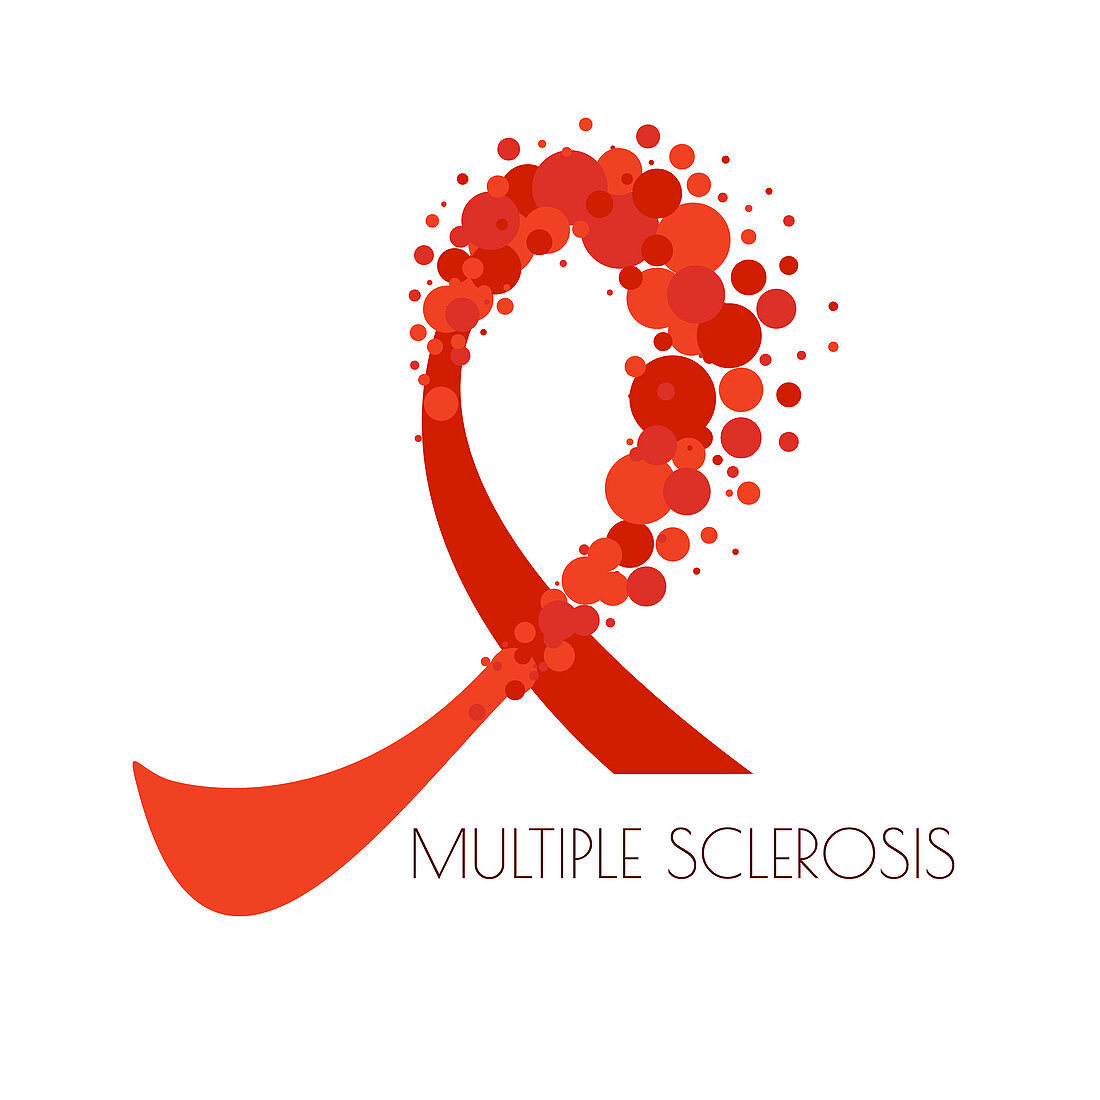 Multiple sclerosis awareness, conceptual illustration